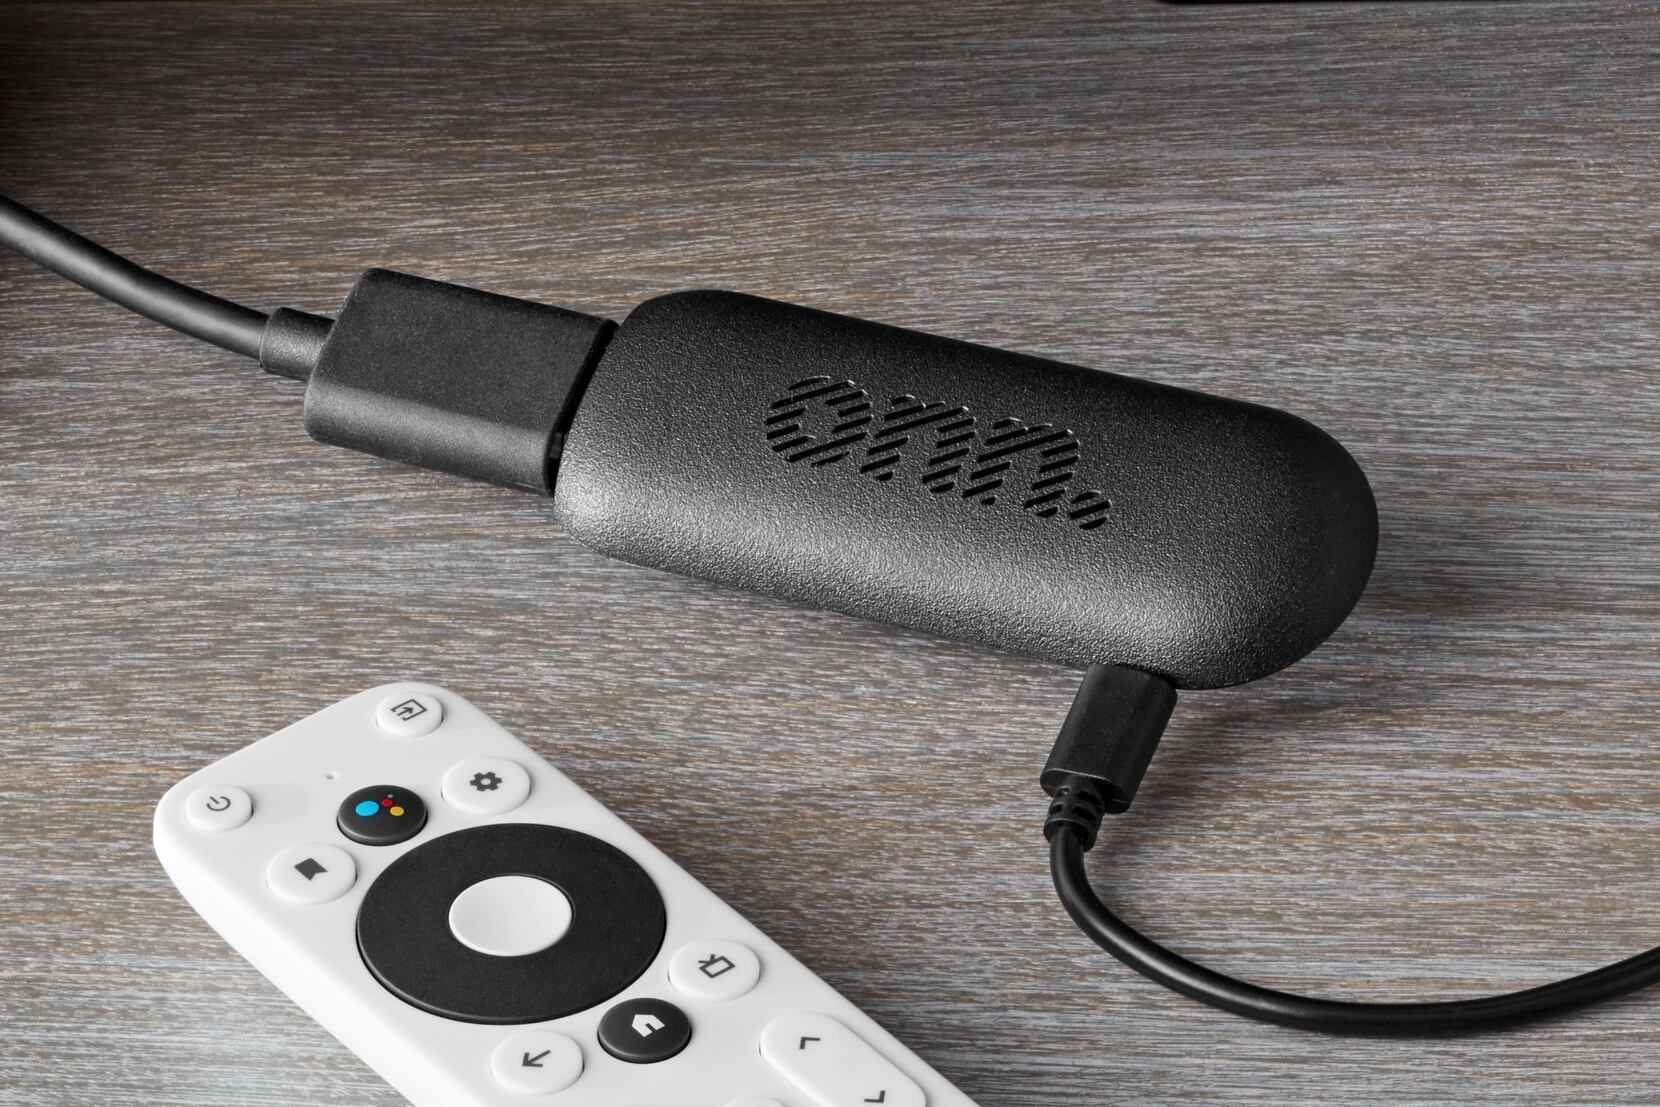 Best Android TV box 2021: Streaming devices and sticks for Netflix